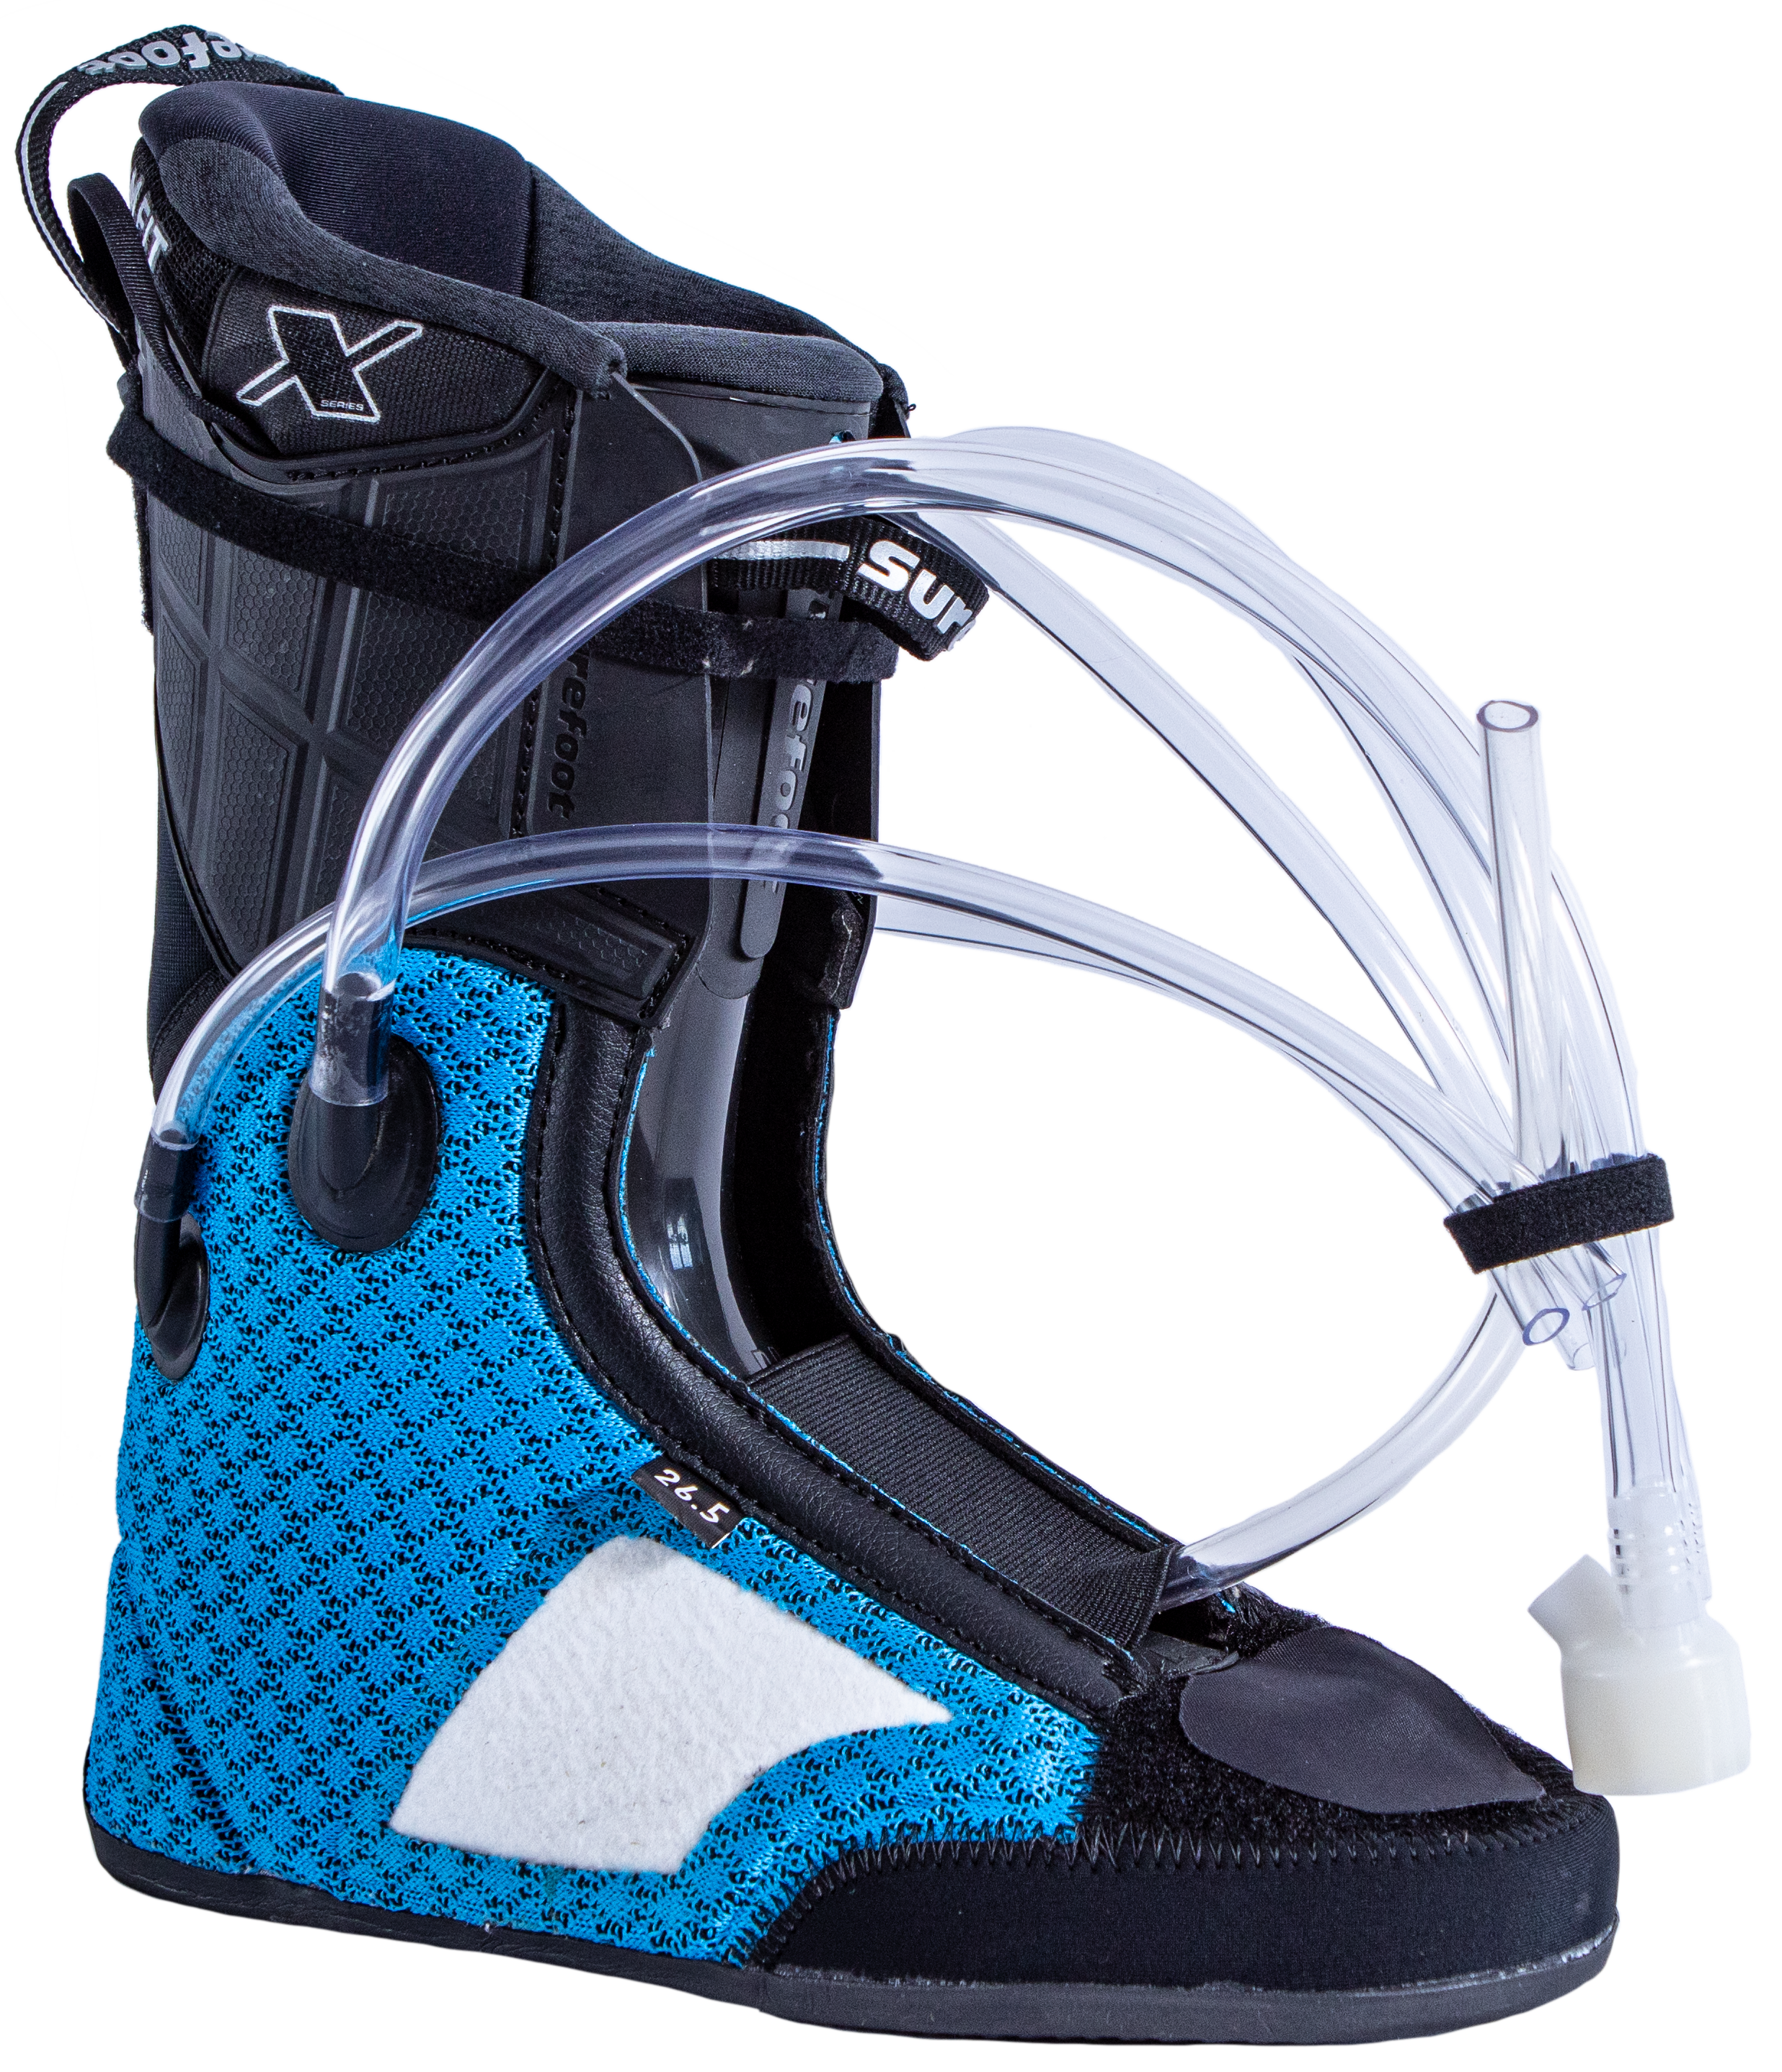 Surefoot Contoura X Heat Custom Foam Injected Ski Boot Liner. Blue liner with black 'R' for race. Plastic tubes for memory foam injection. Heating element cord for heater battery connection located on the top outer edge.